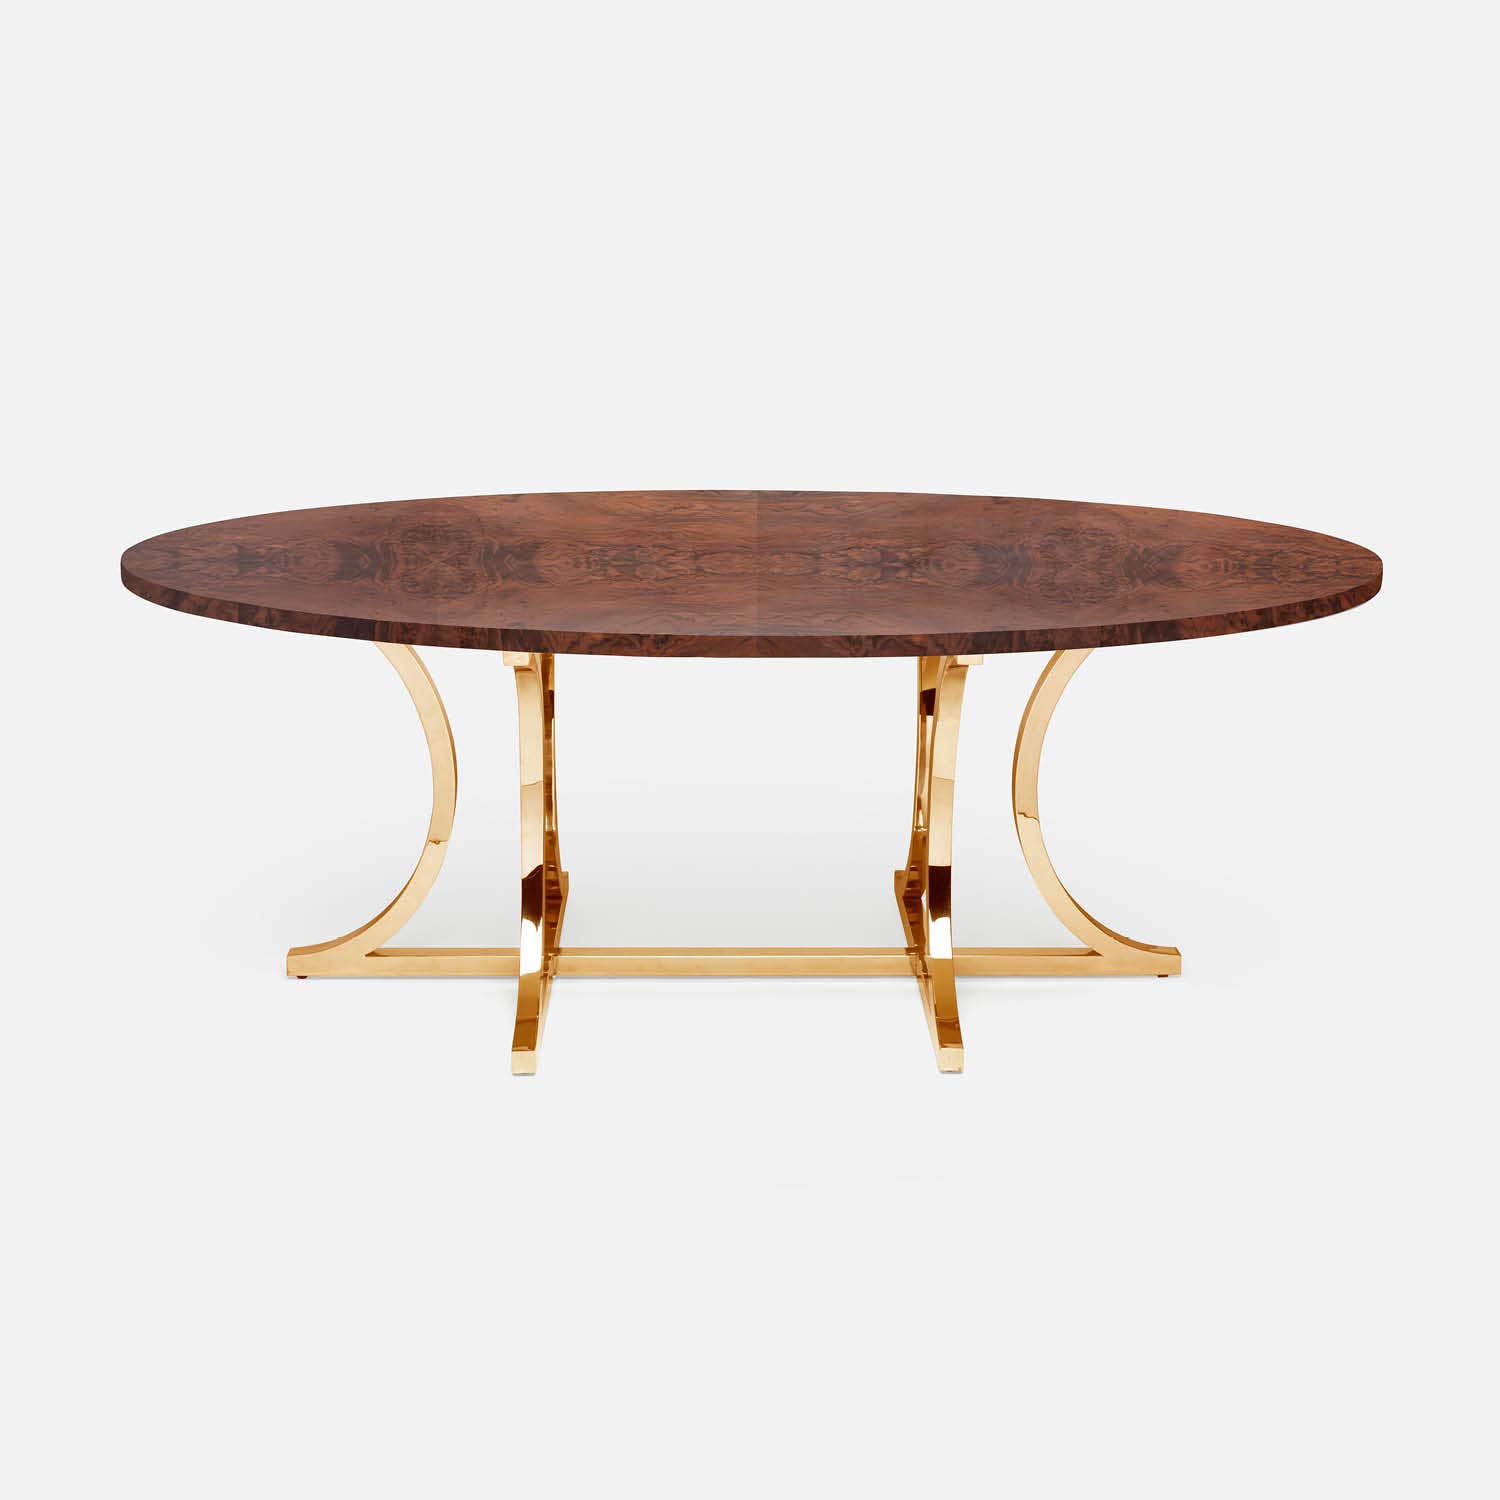 Made Goods Leighton 72" x 42" x 30" Polished Gold Steel Dinning Table With Oval Walnut Veneer Table Top